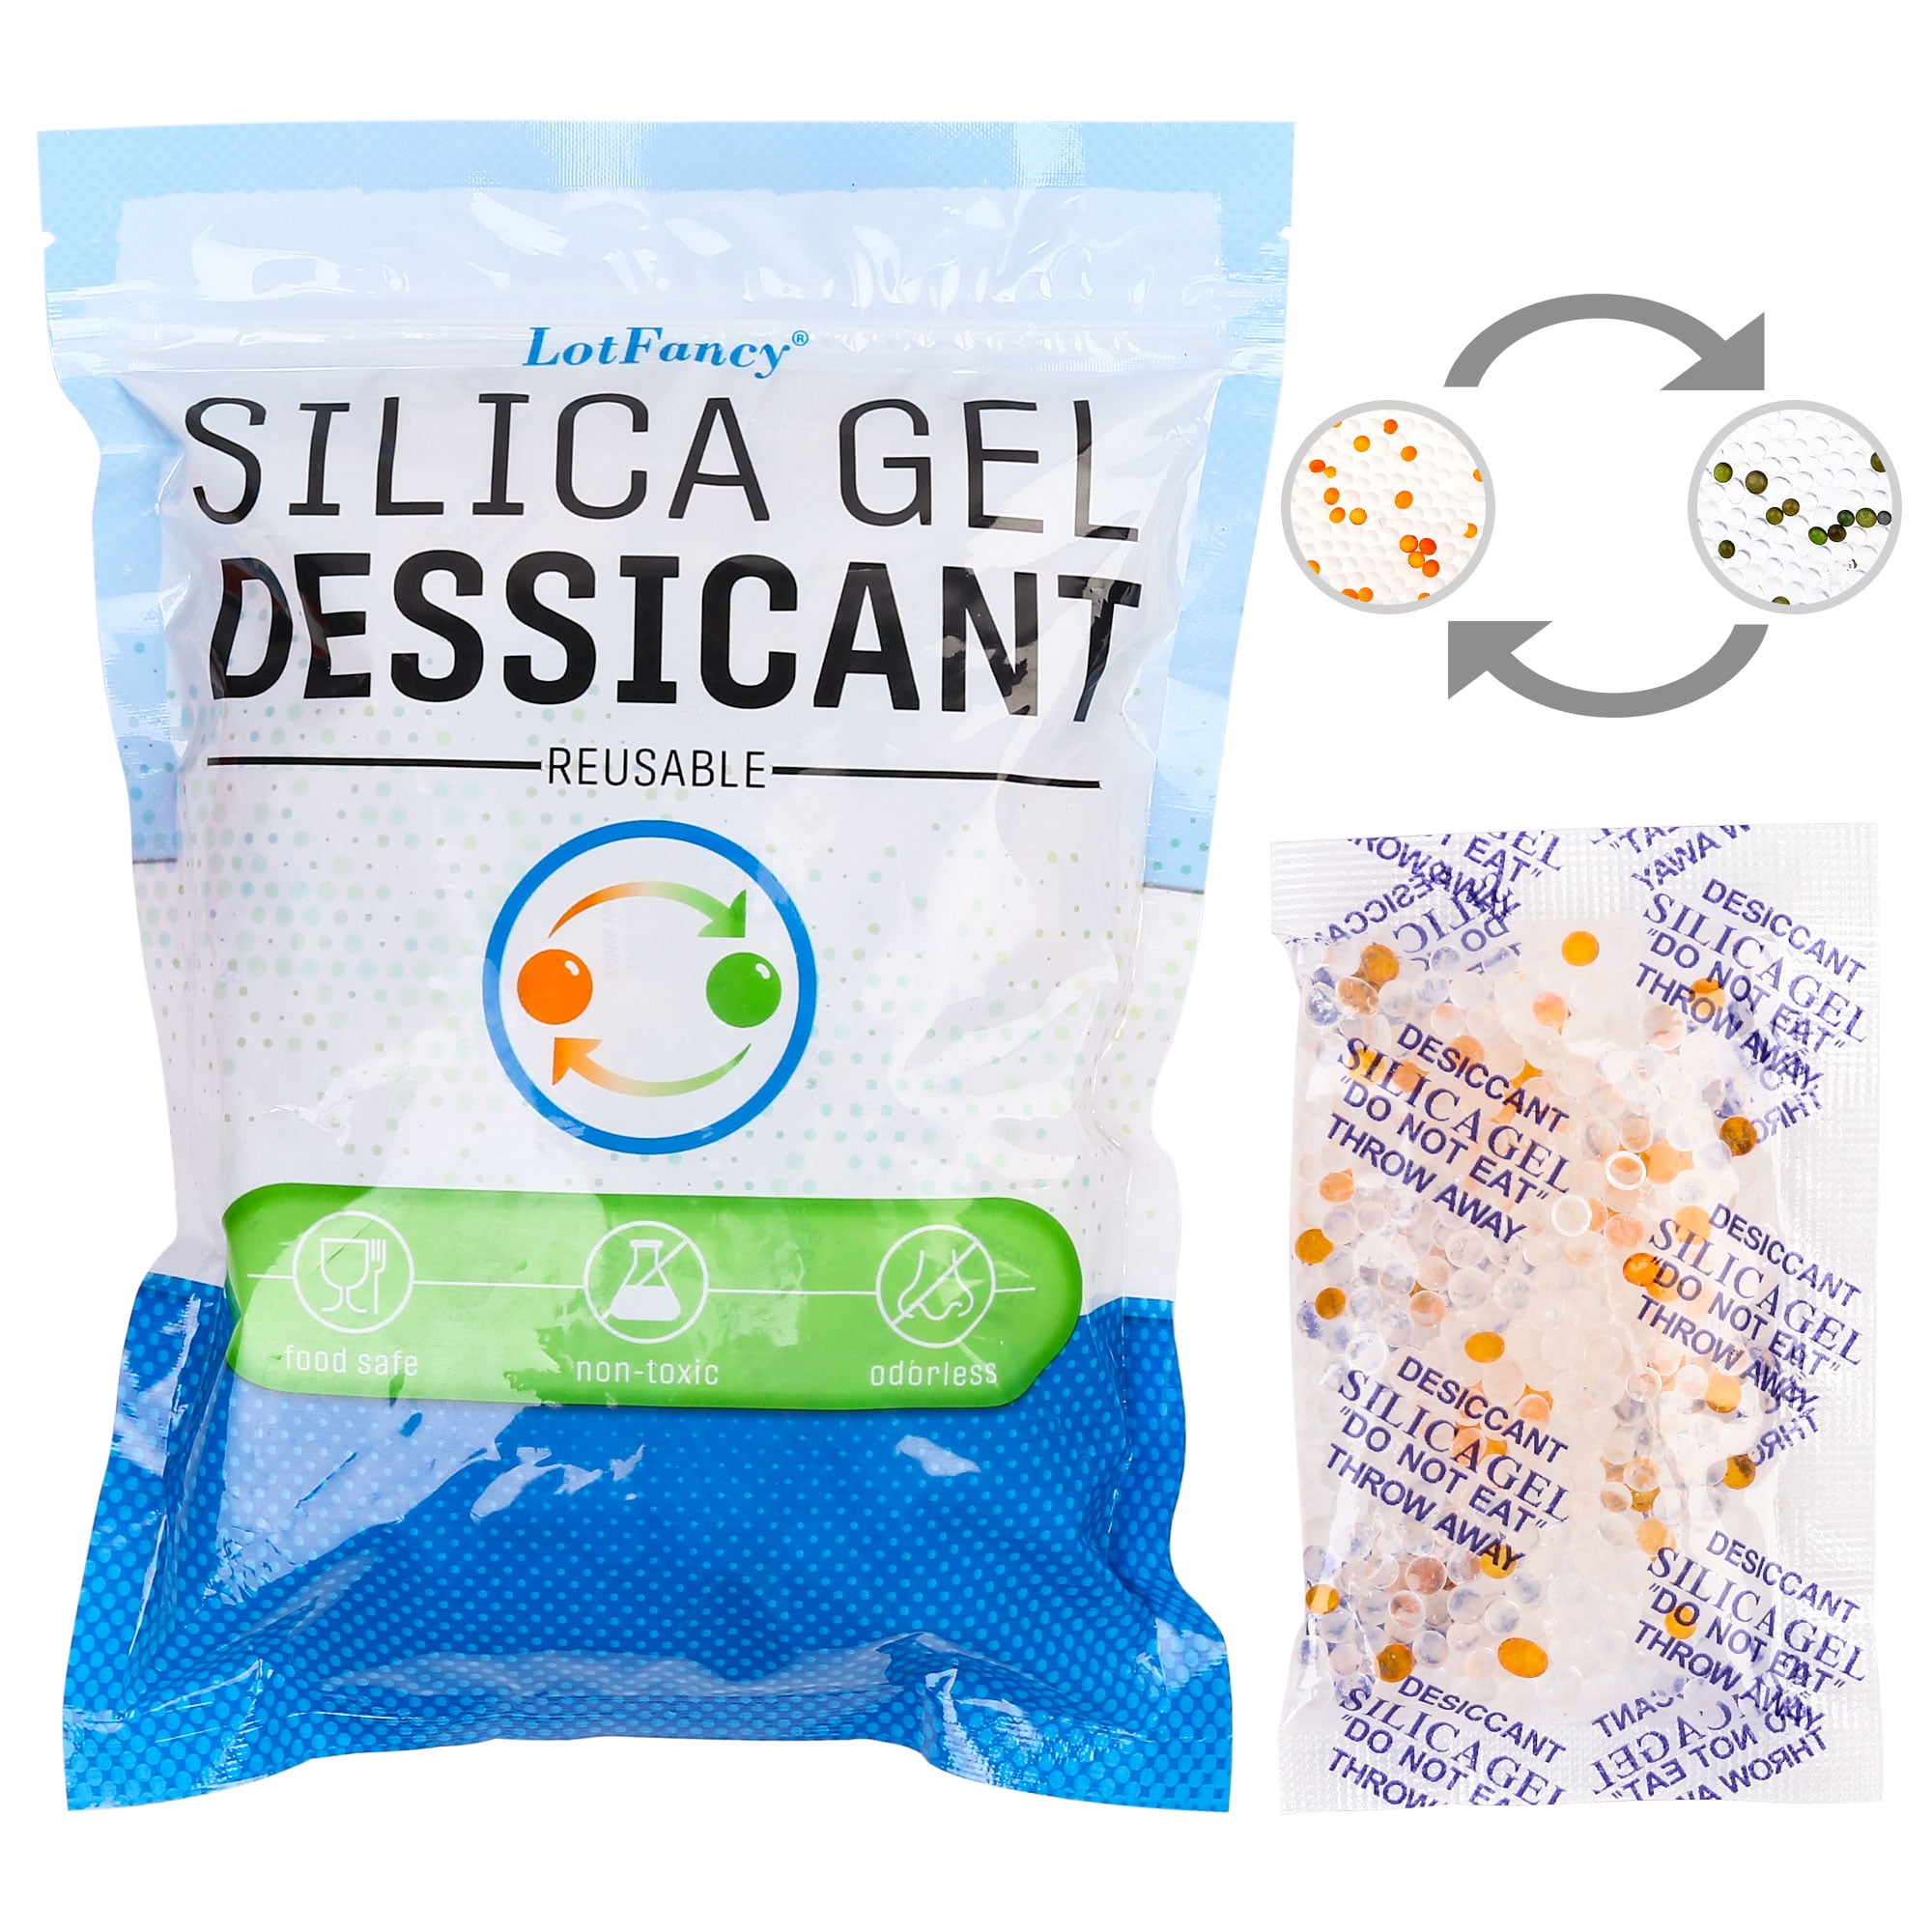 wisedry 5 Gram 60 Packs Silica Gel Packets Rechargeable Desiccant Pouches  with Color Indicating Beads Reusable Moisture Absorbers Bags for Gun Safes  Closet Tools Storage Food Grade 